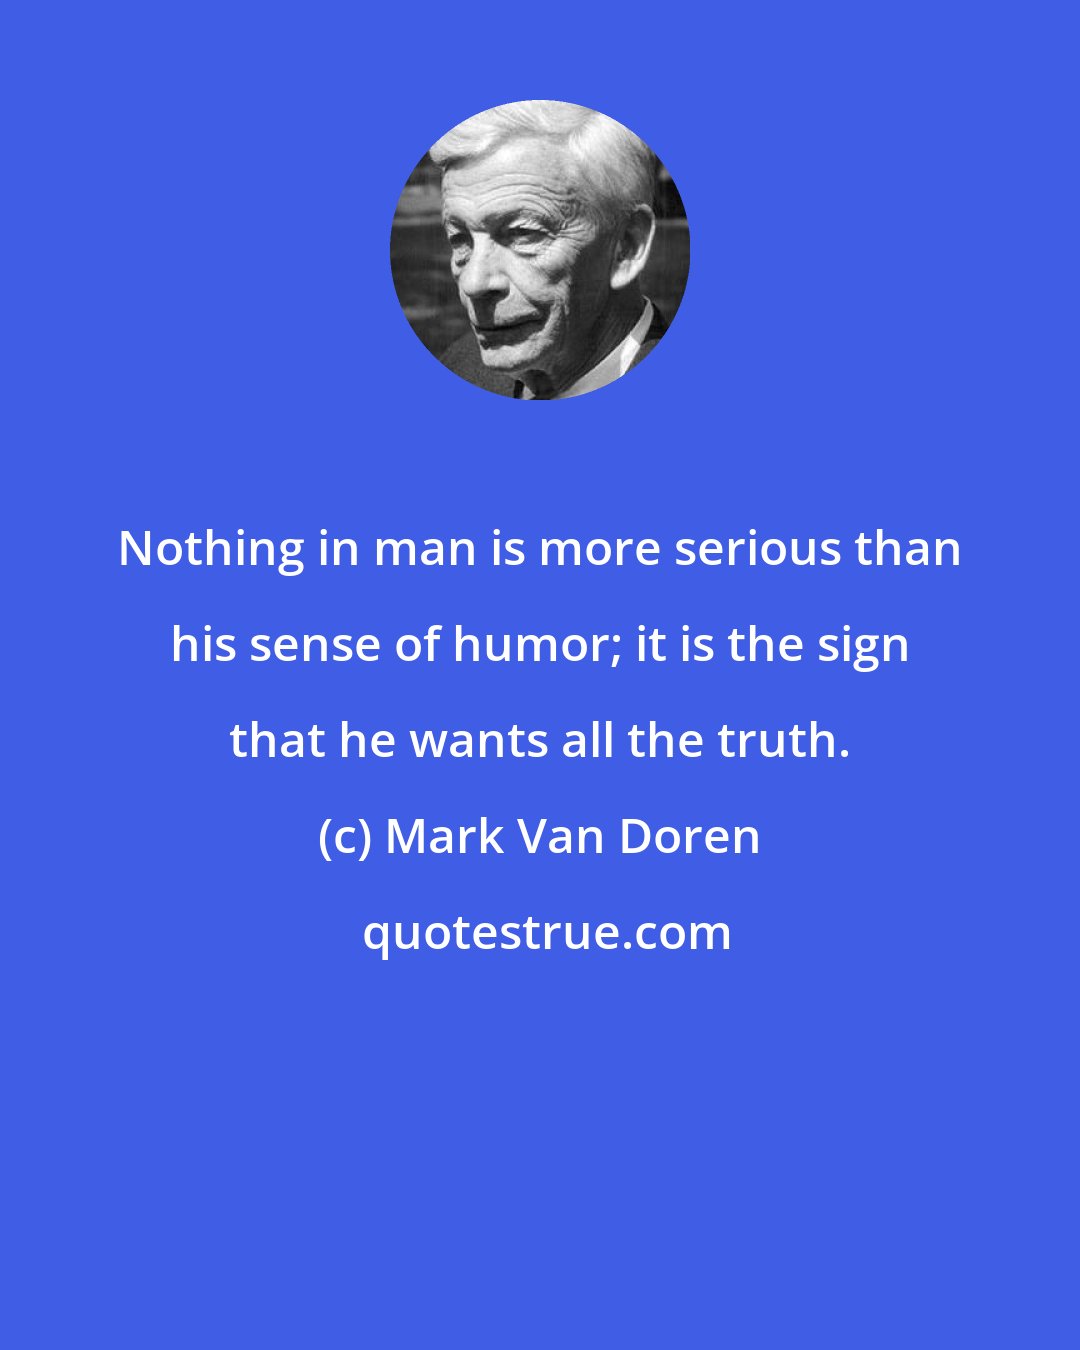 Mark Van Doren: Nothing in man is more serious than his sense of humor; it is the sign that he wants all the truth.